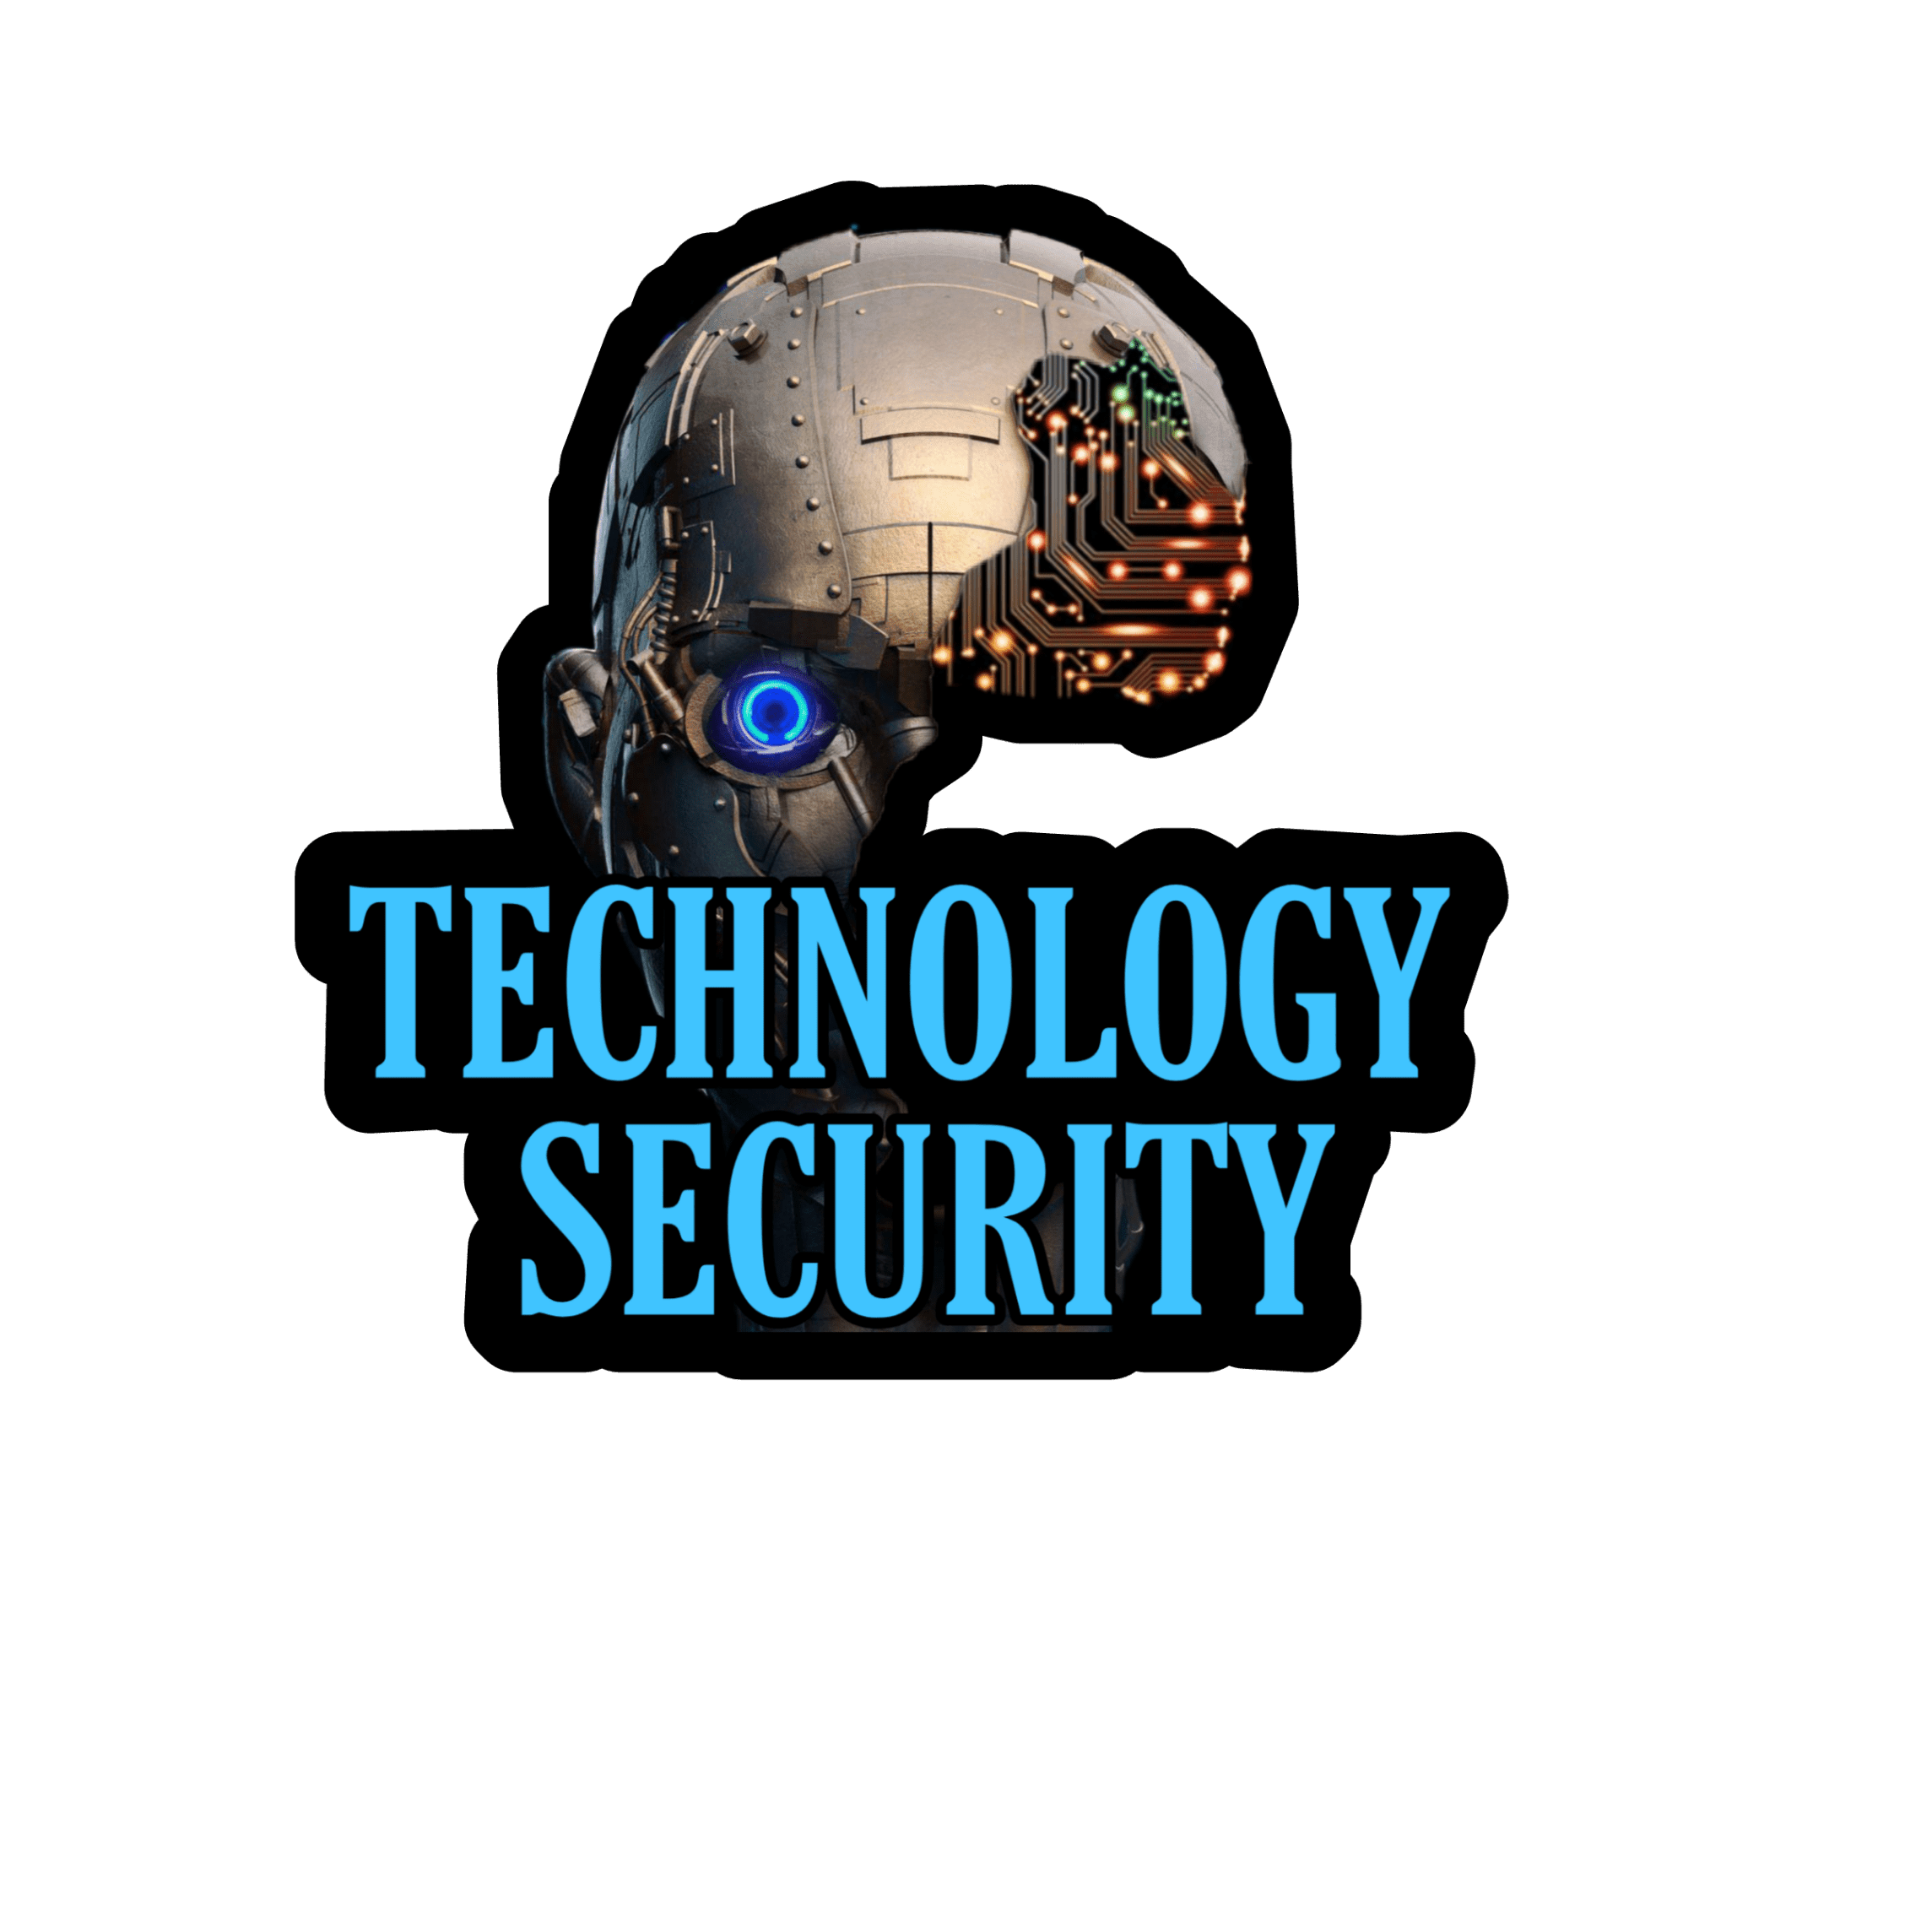 Technology Security